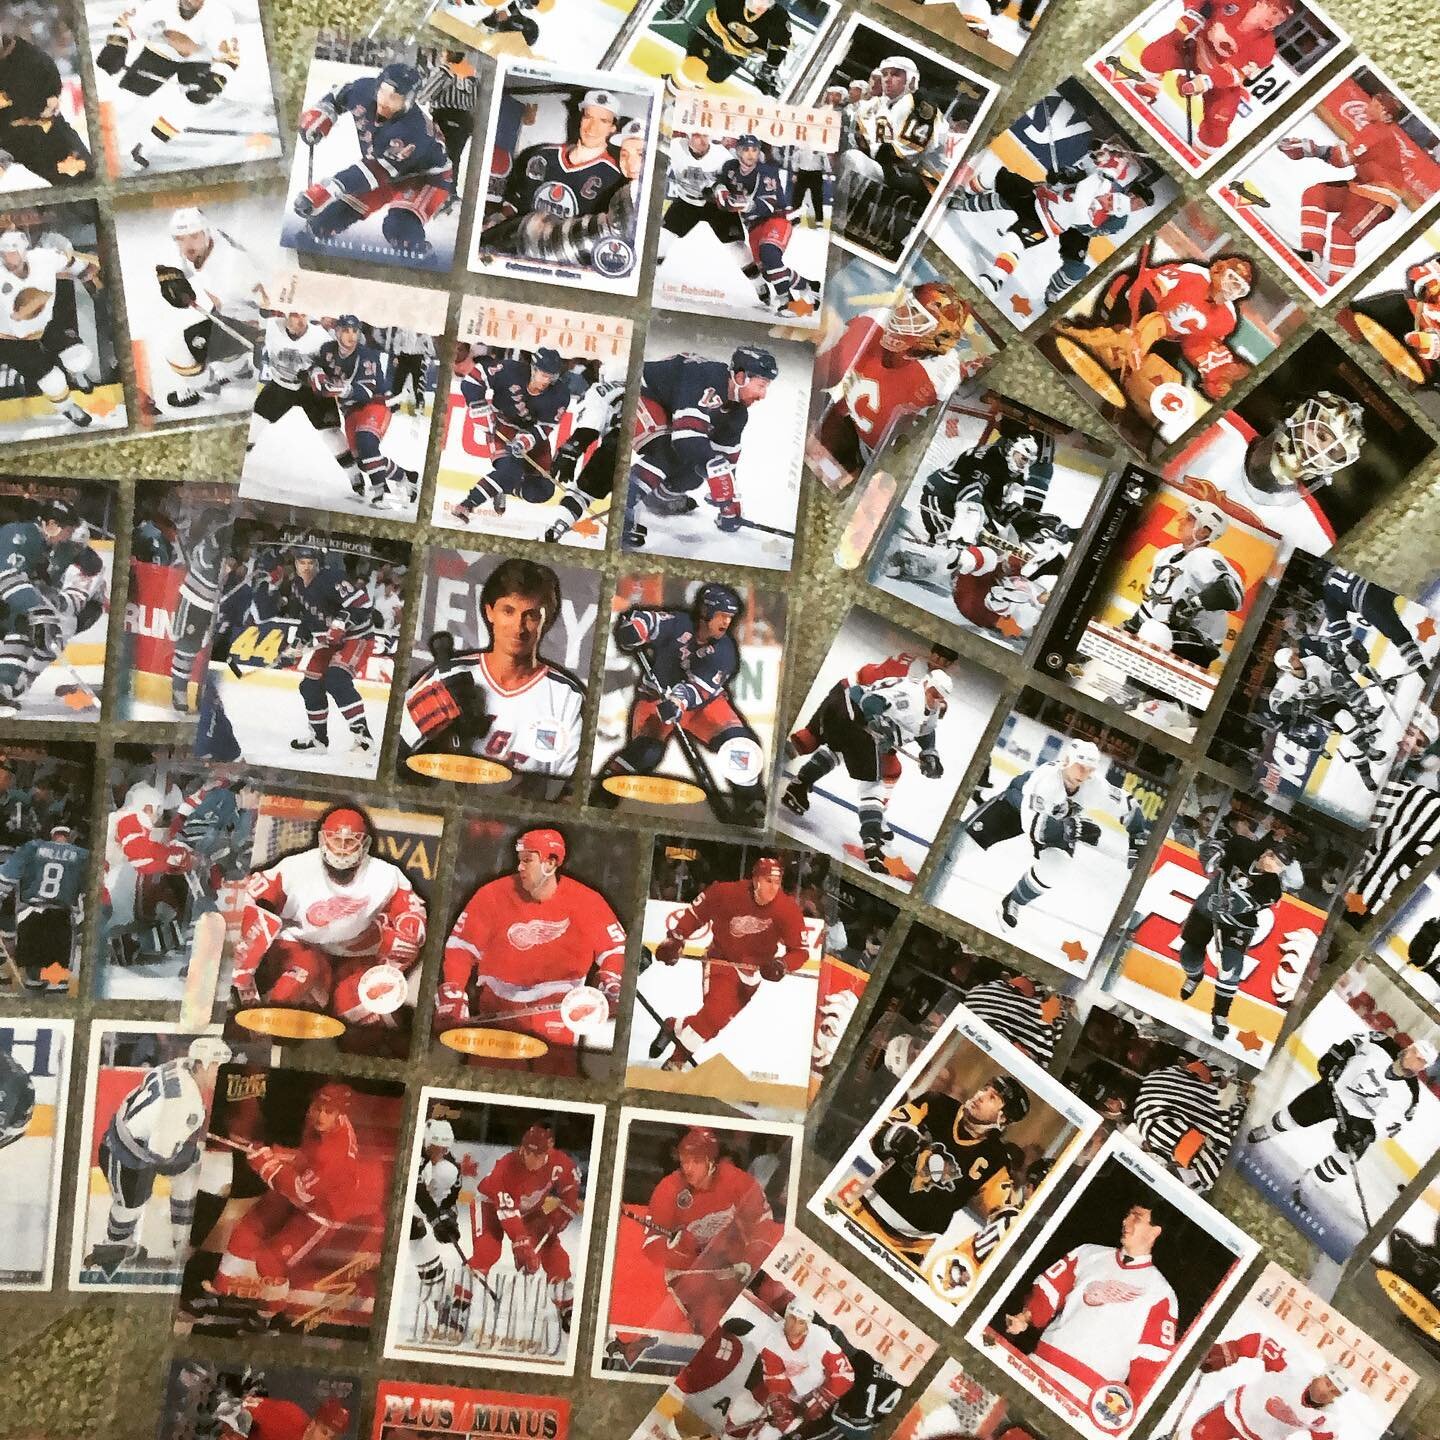 found old trading cards. who spots Messier in an Oilers shirt? #legend @edmontonoilers @therealmarkmessier